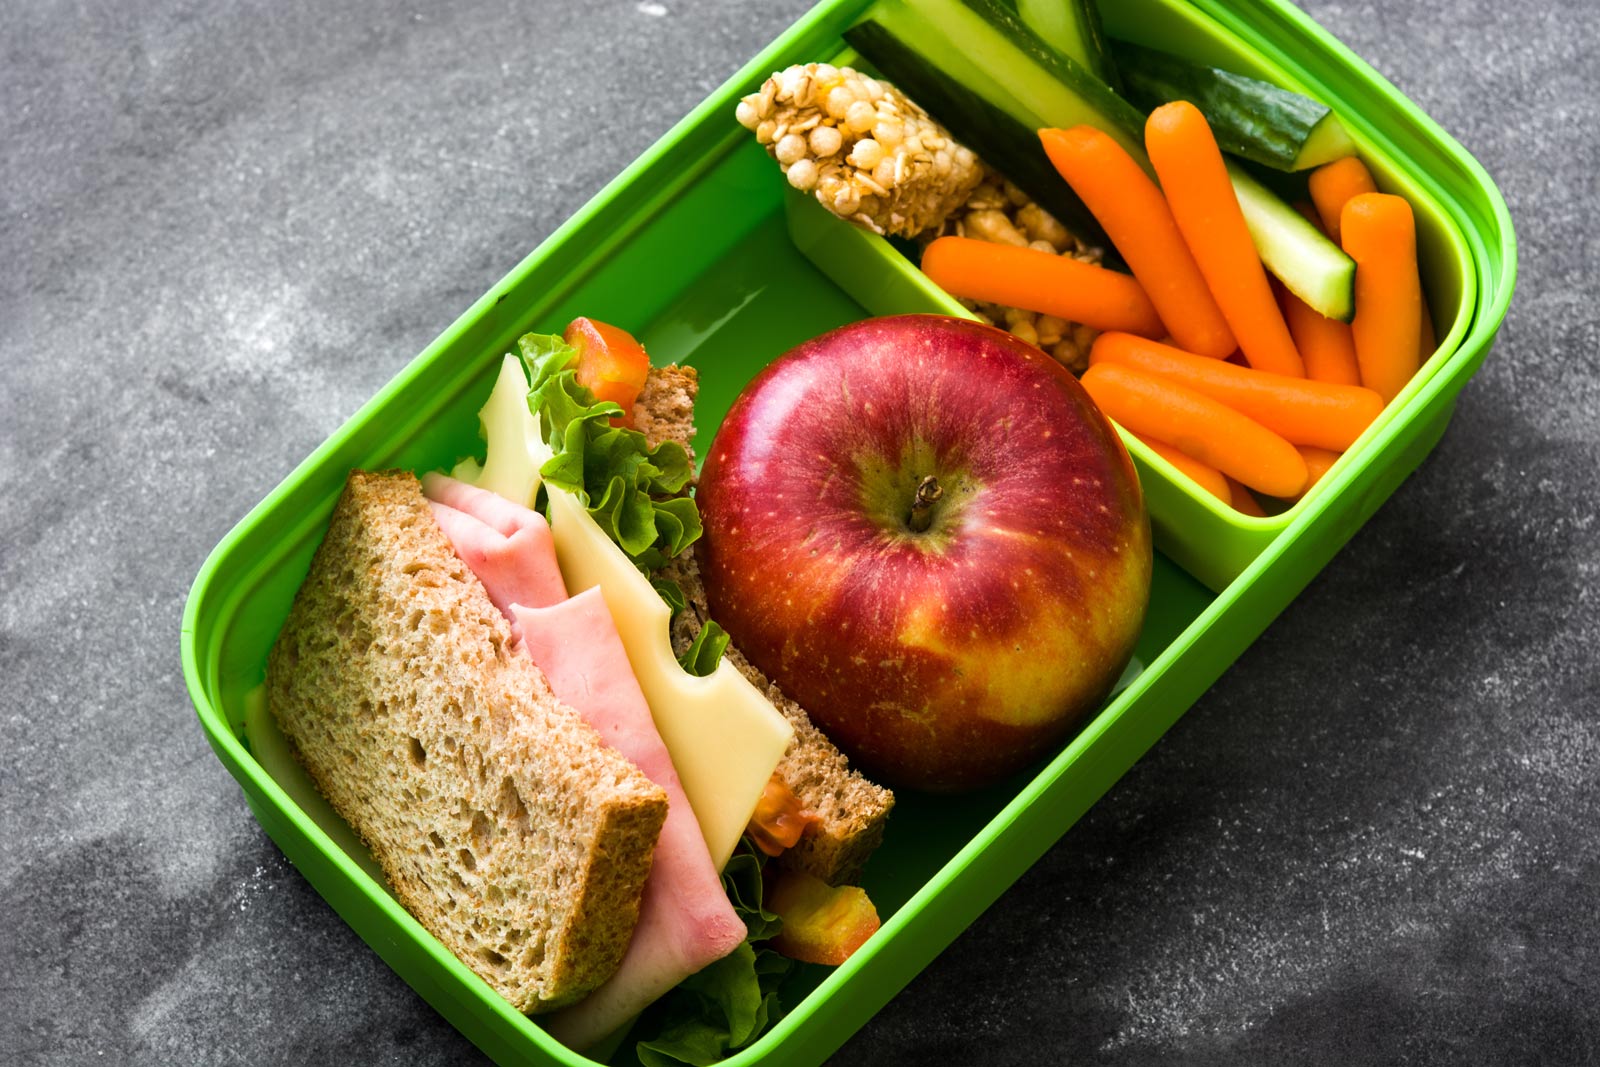 Make your child’s school lunch box tooth-friendly